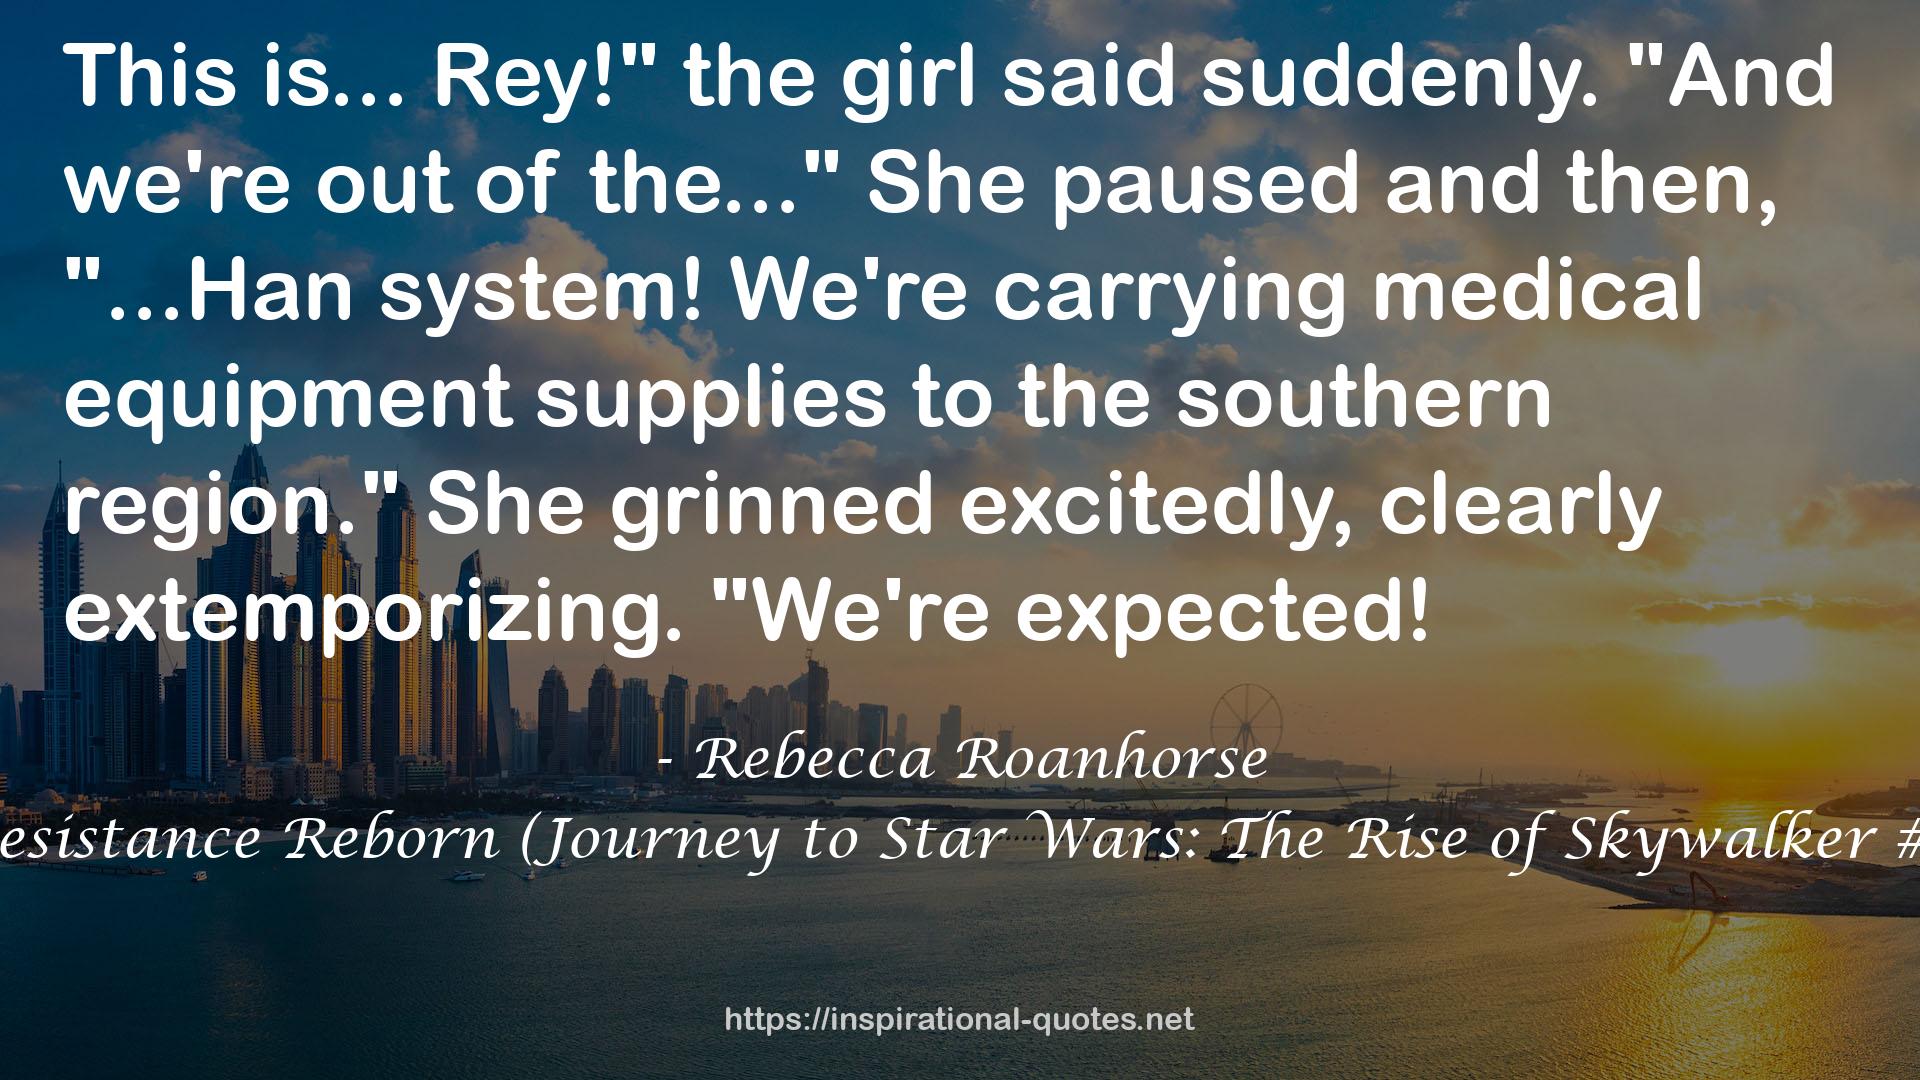 Resistance Reborn (Journey to Star Wars: The Rise of Skywalker #1) QUOTES